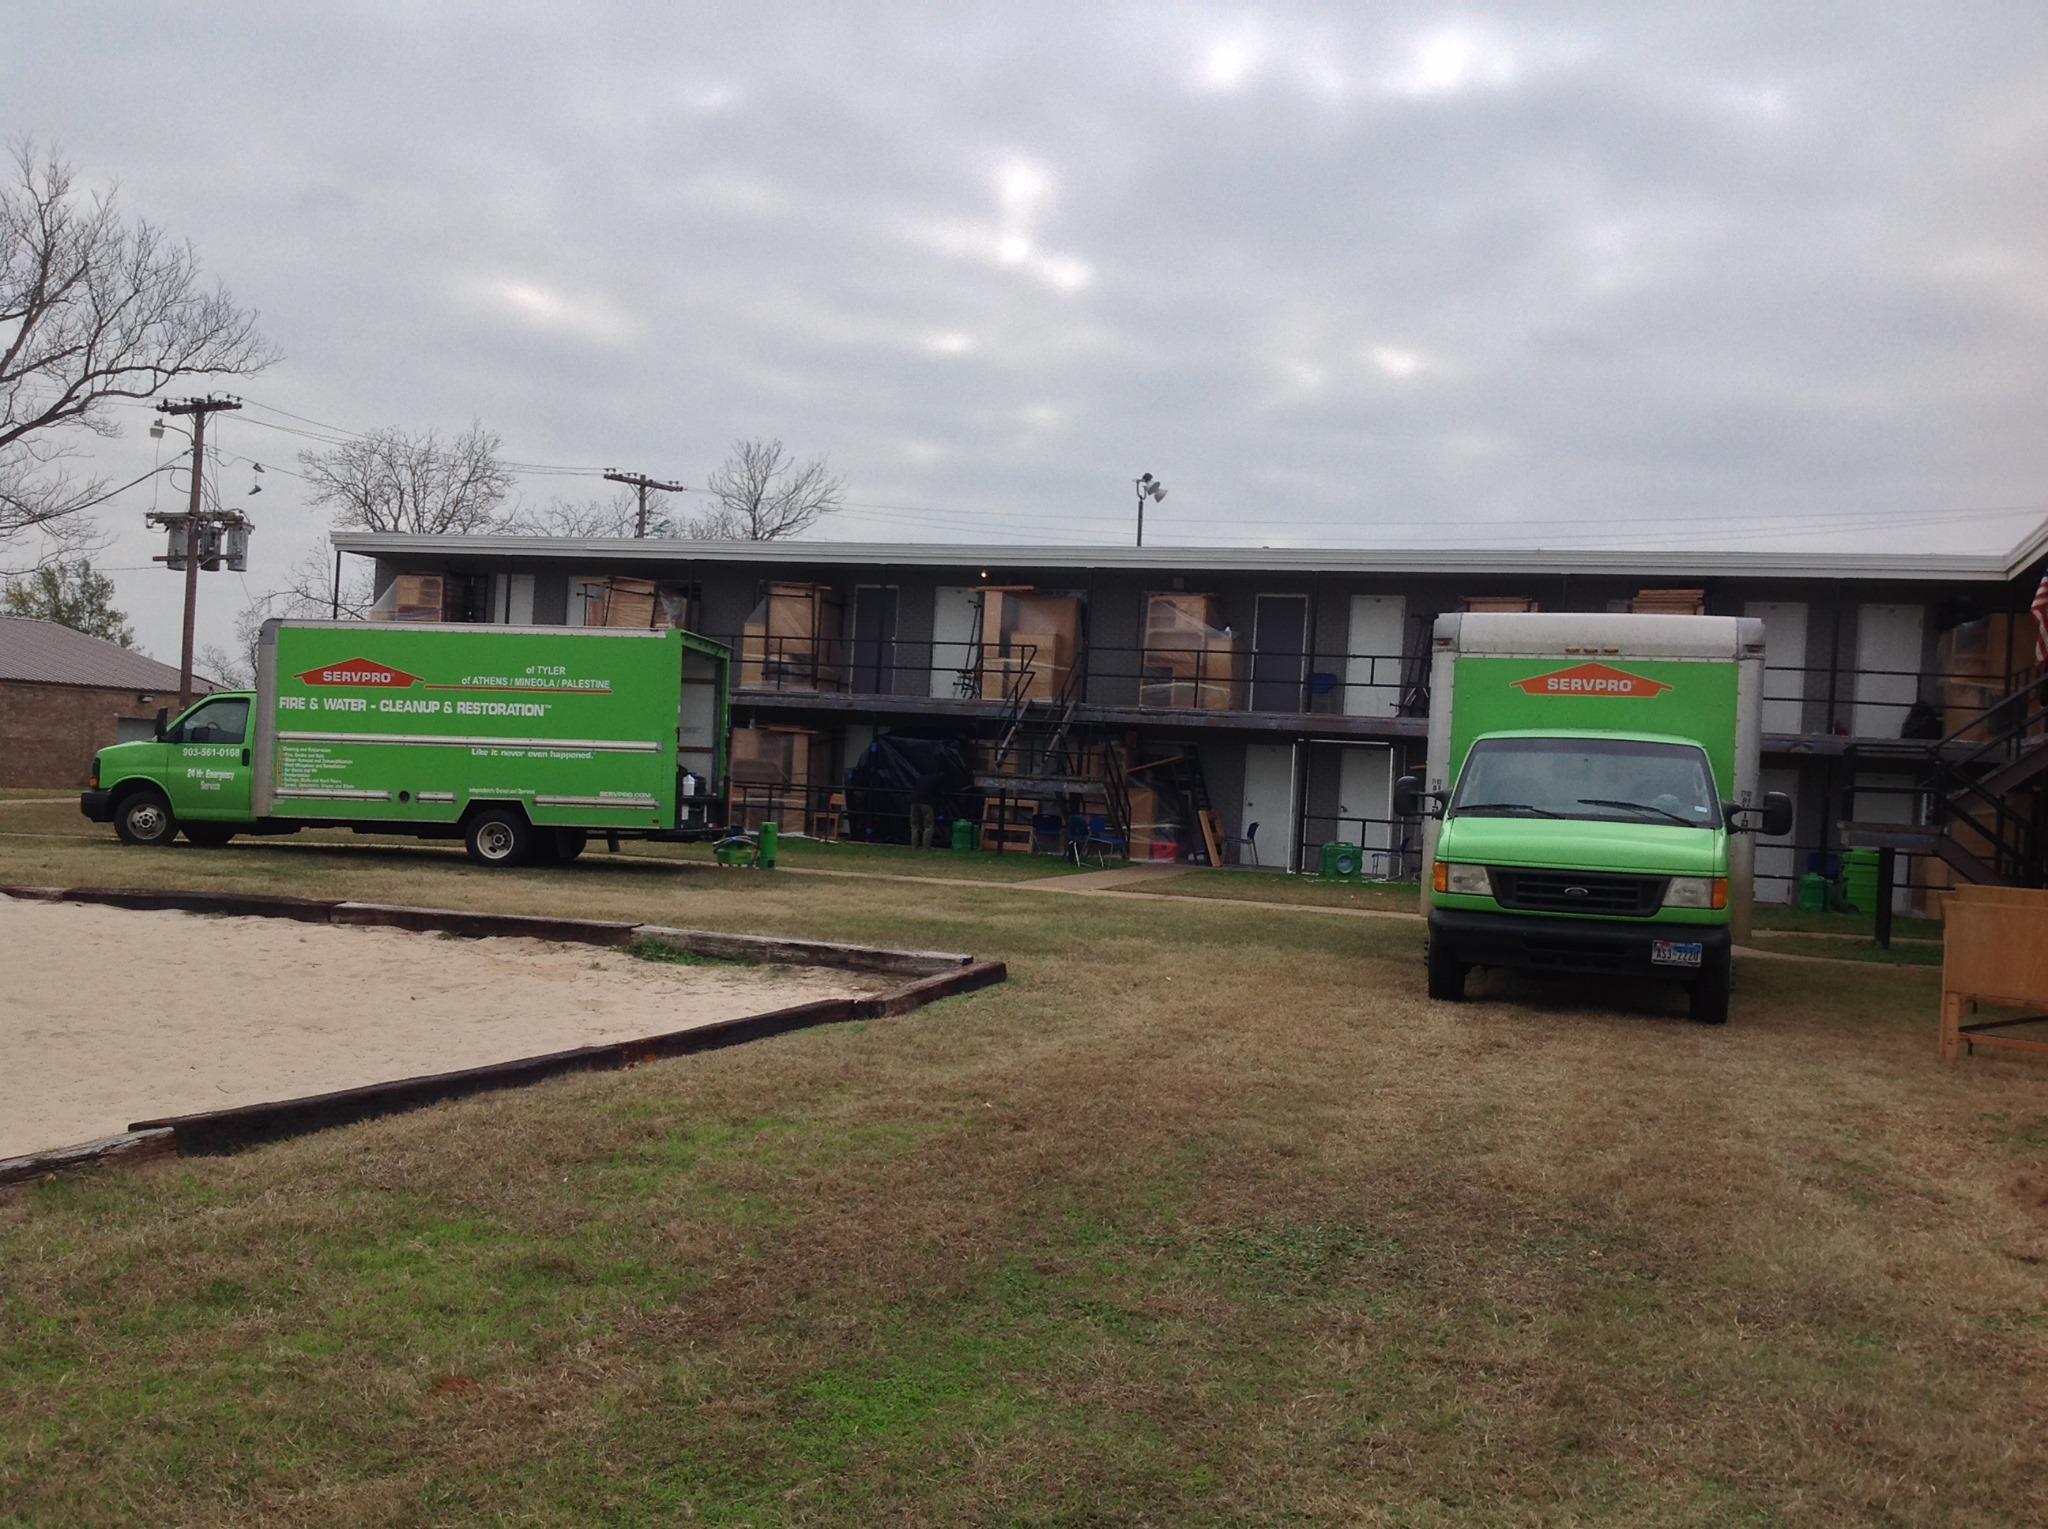 SERVPRO of Tyler is performing all cleanup and bioremediation in accordance with the guidelines provided by the CDC and local authorities. Contact SERVPRO Team Tyler for your property's sanitation needs. Be prepared. Take preventative measures.